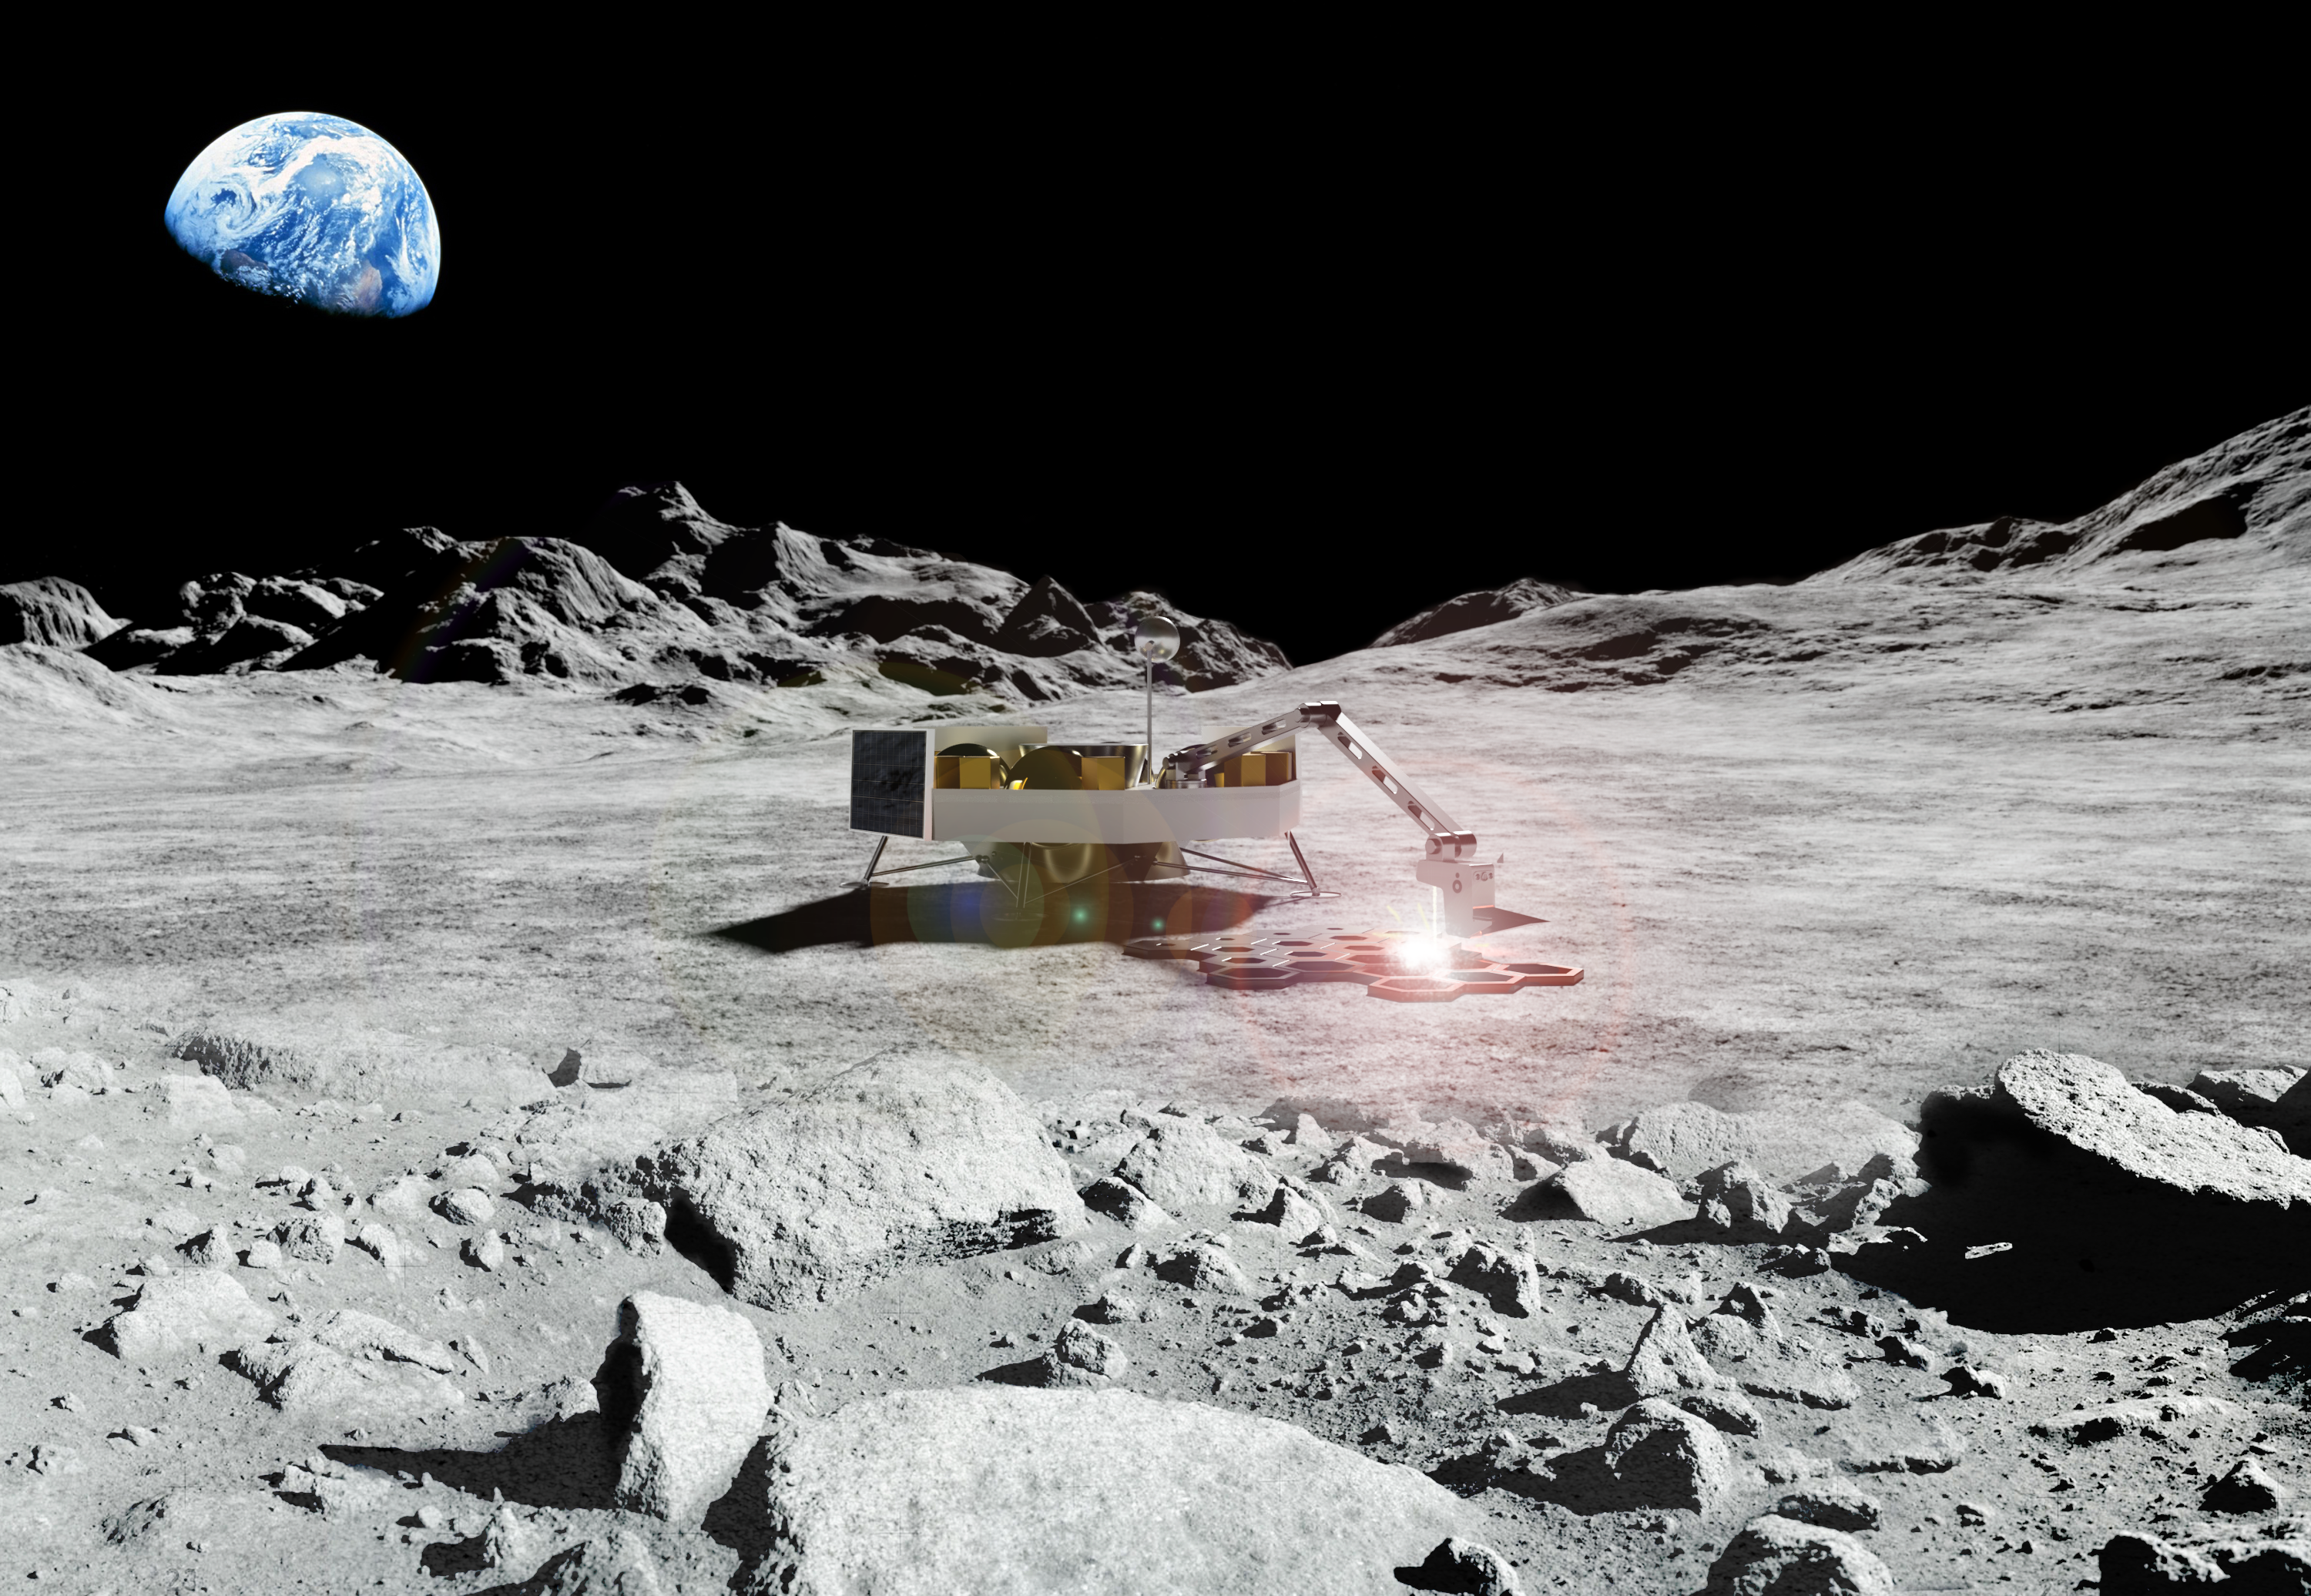 Company that 3D-printed Army barracks wants to build habitats on the Moon